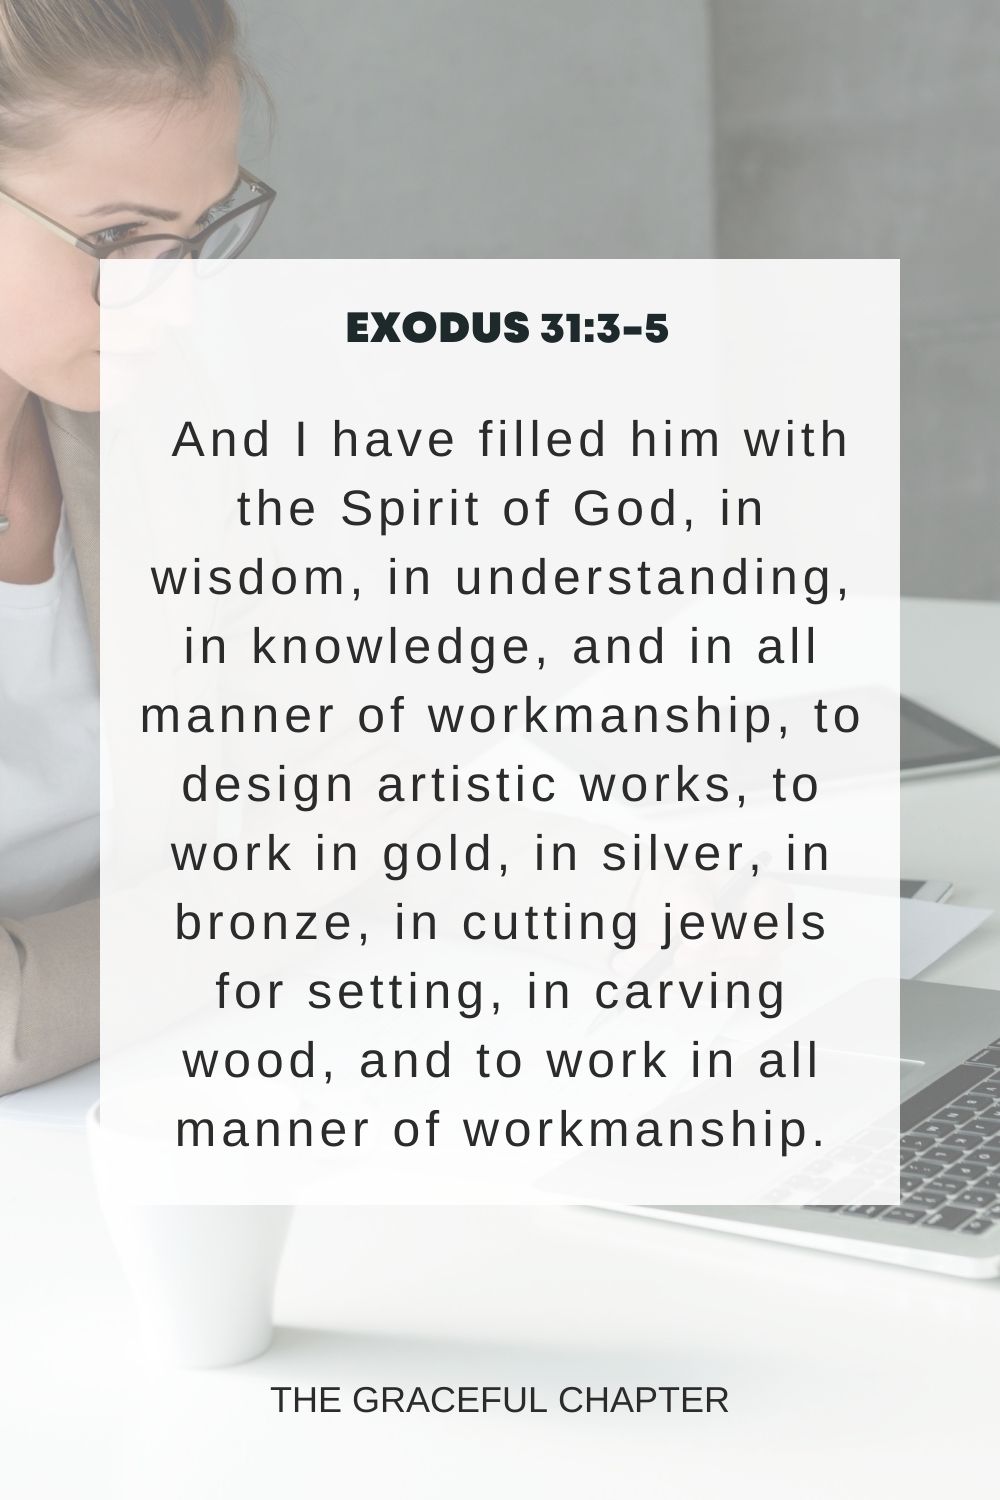 And I have filled him with the Spirit of God, in wisdom, in understanding, in knowledge, and in all manner of workmanship, to design artistic works, to work in gold, in silver, in bronze, in cutting jewels for setting, in carving wood, and to work in all manner of workmanship. Exodus 31:3-5